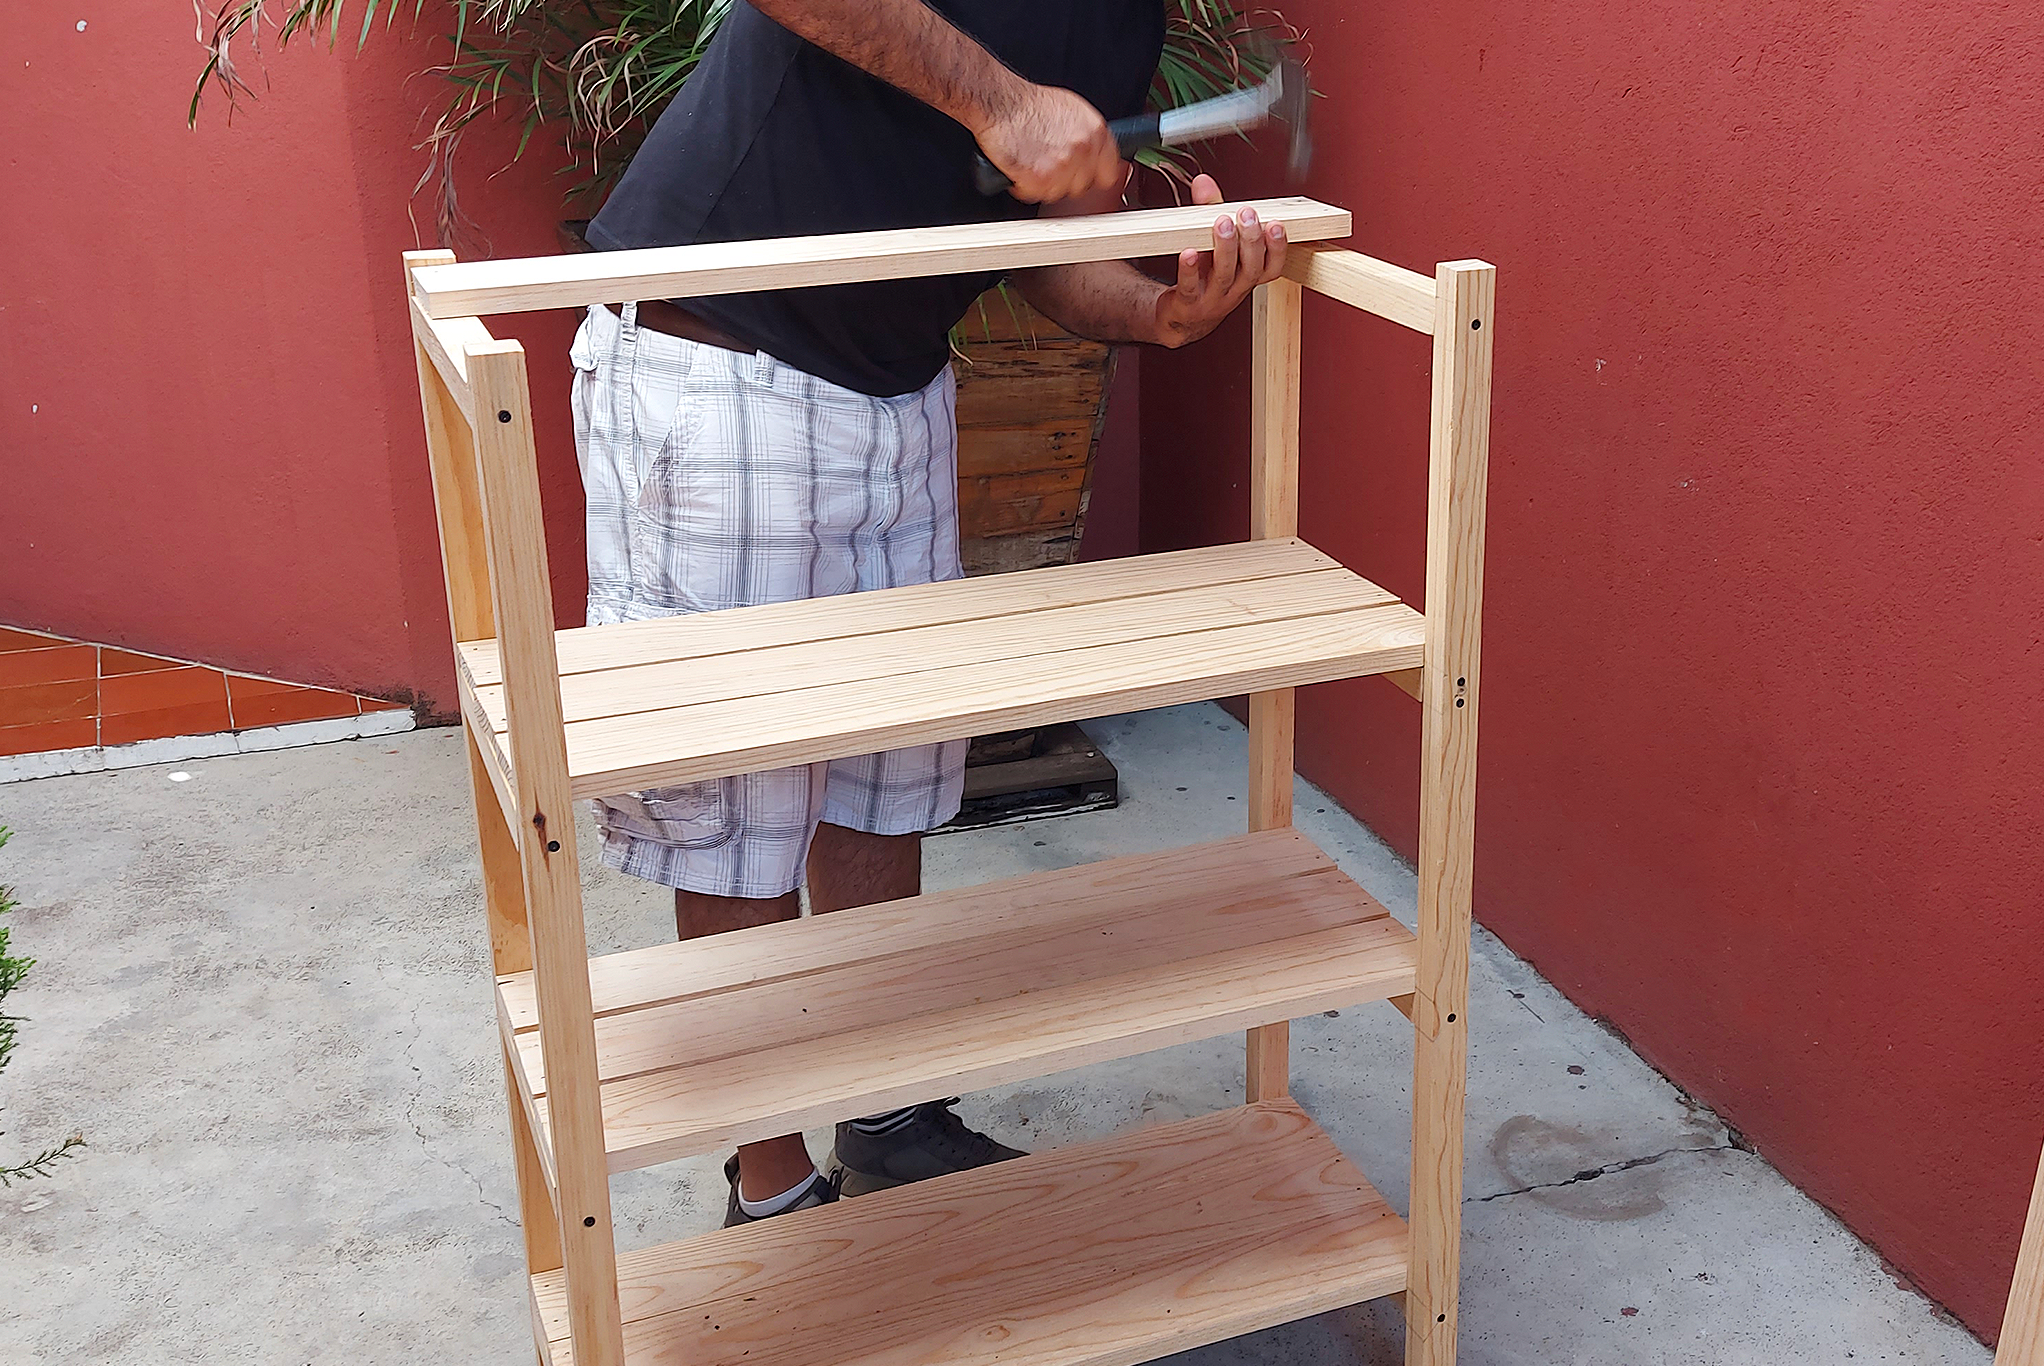 Instructable_Wooden_Utility_Cart_Grill_CraftyAmigo.png